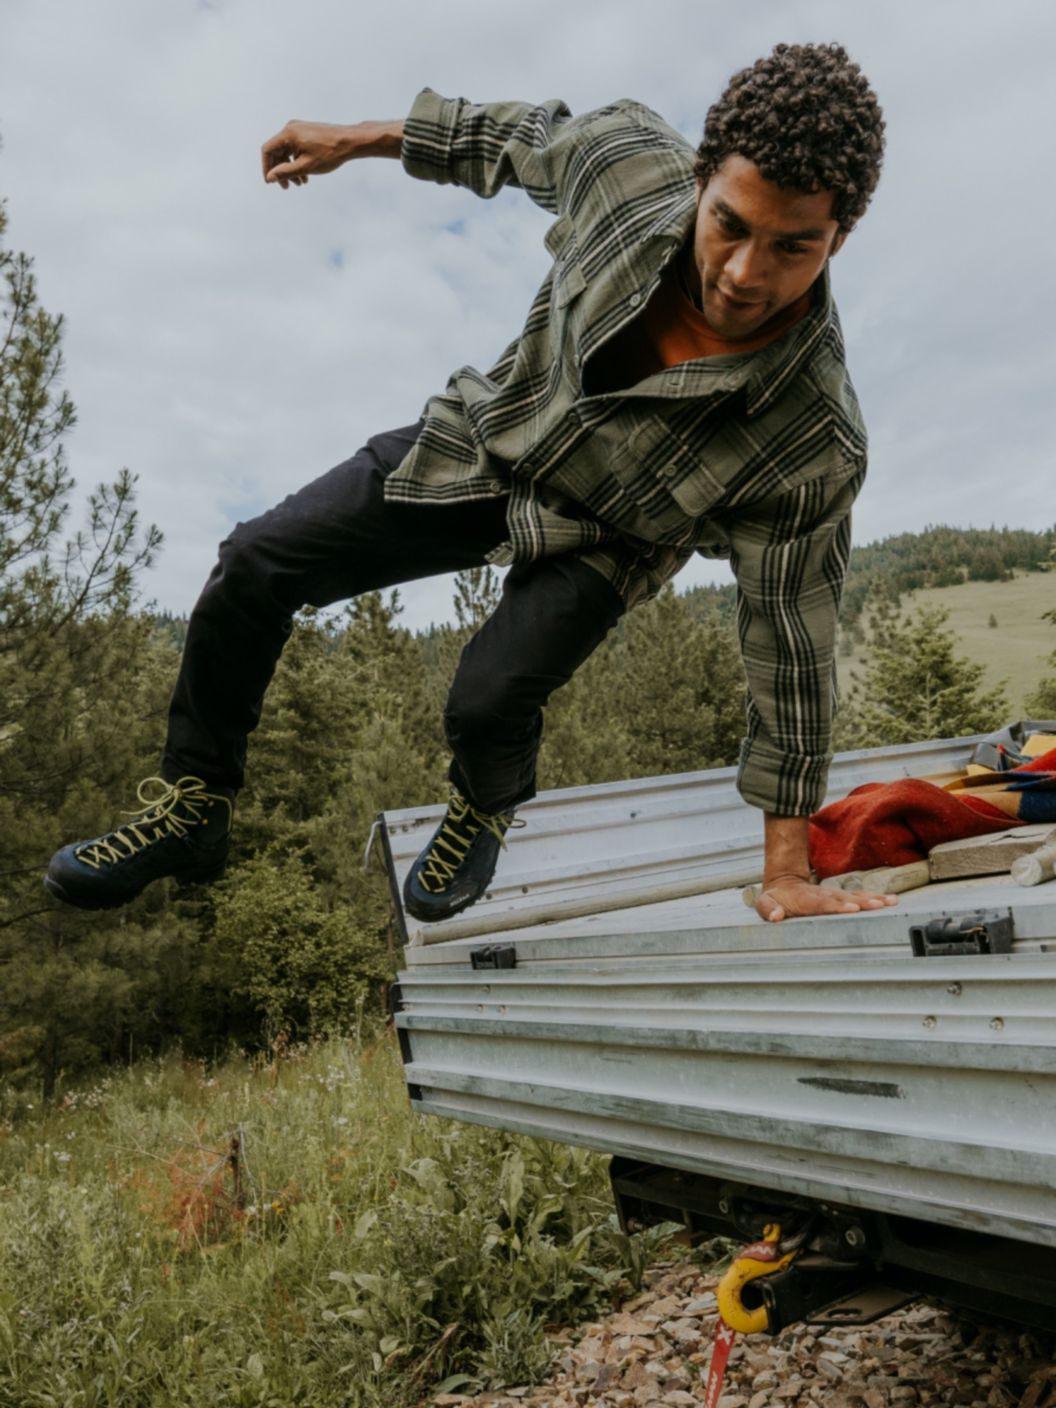 A man wearing a green flannel is in mid-air after jumping off the bed of a truck.